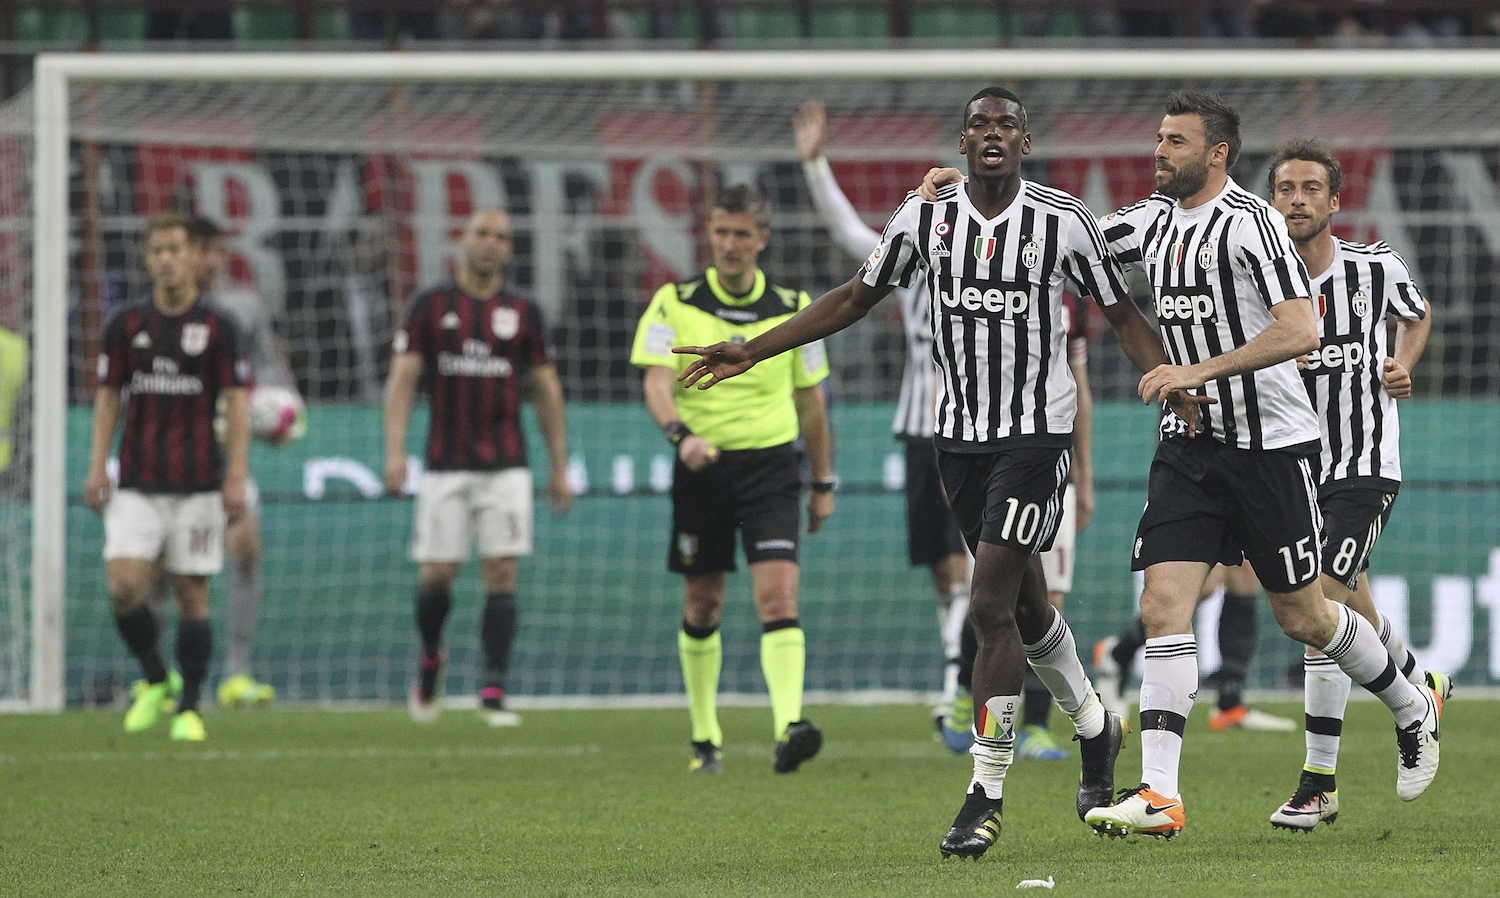 Pogba celebrates his goal as Milan players look on (Photo by Marco Luzzani/Getty Images)